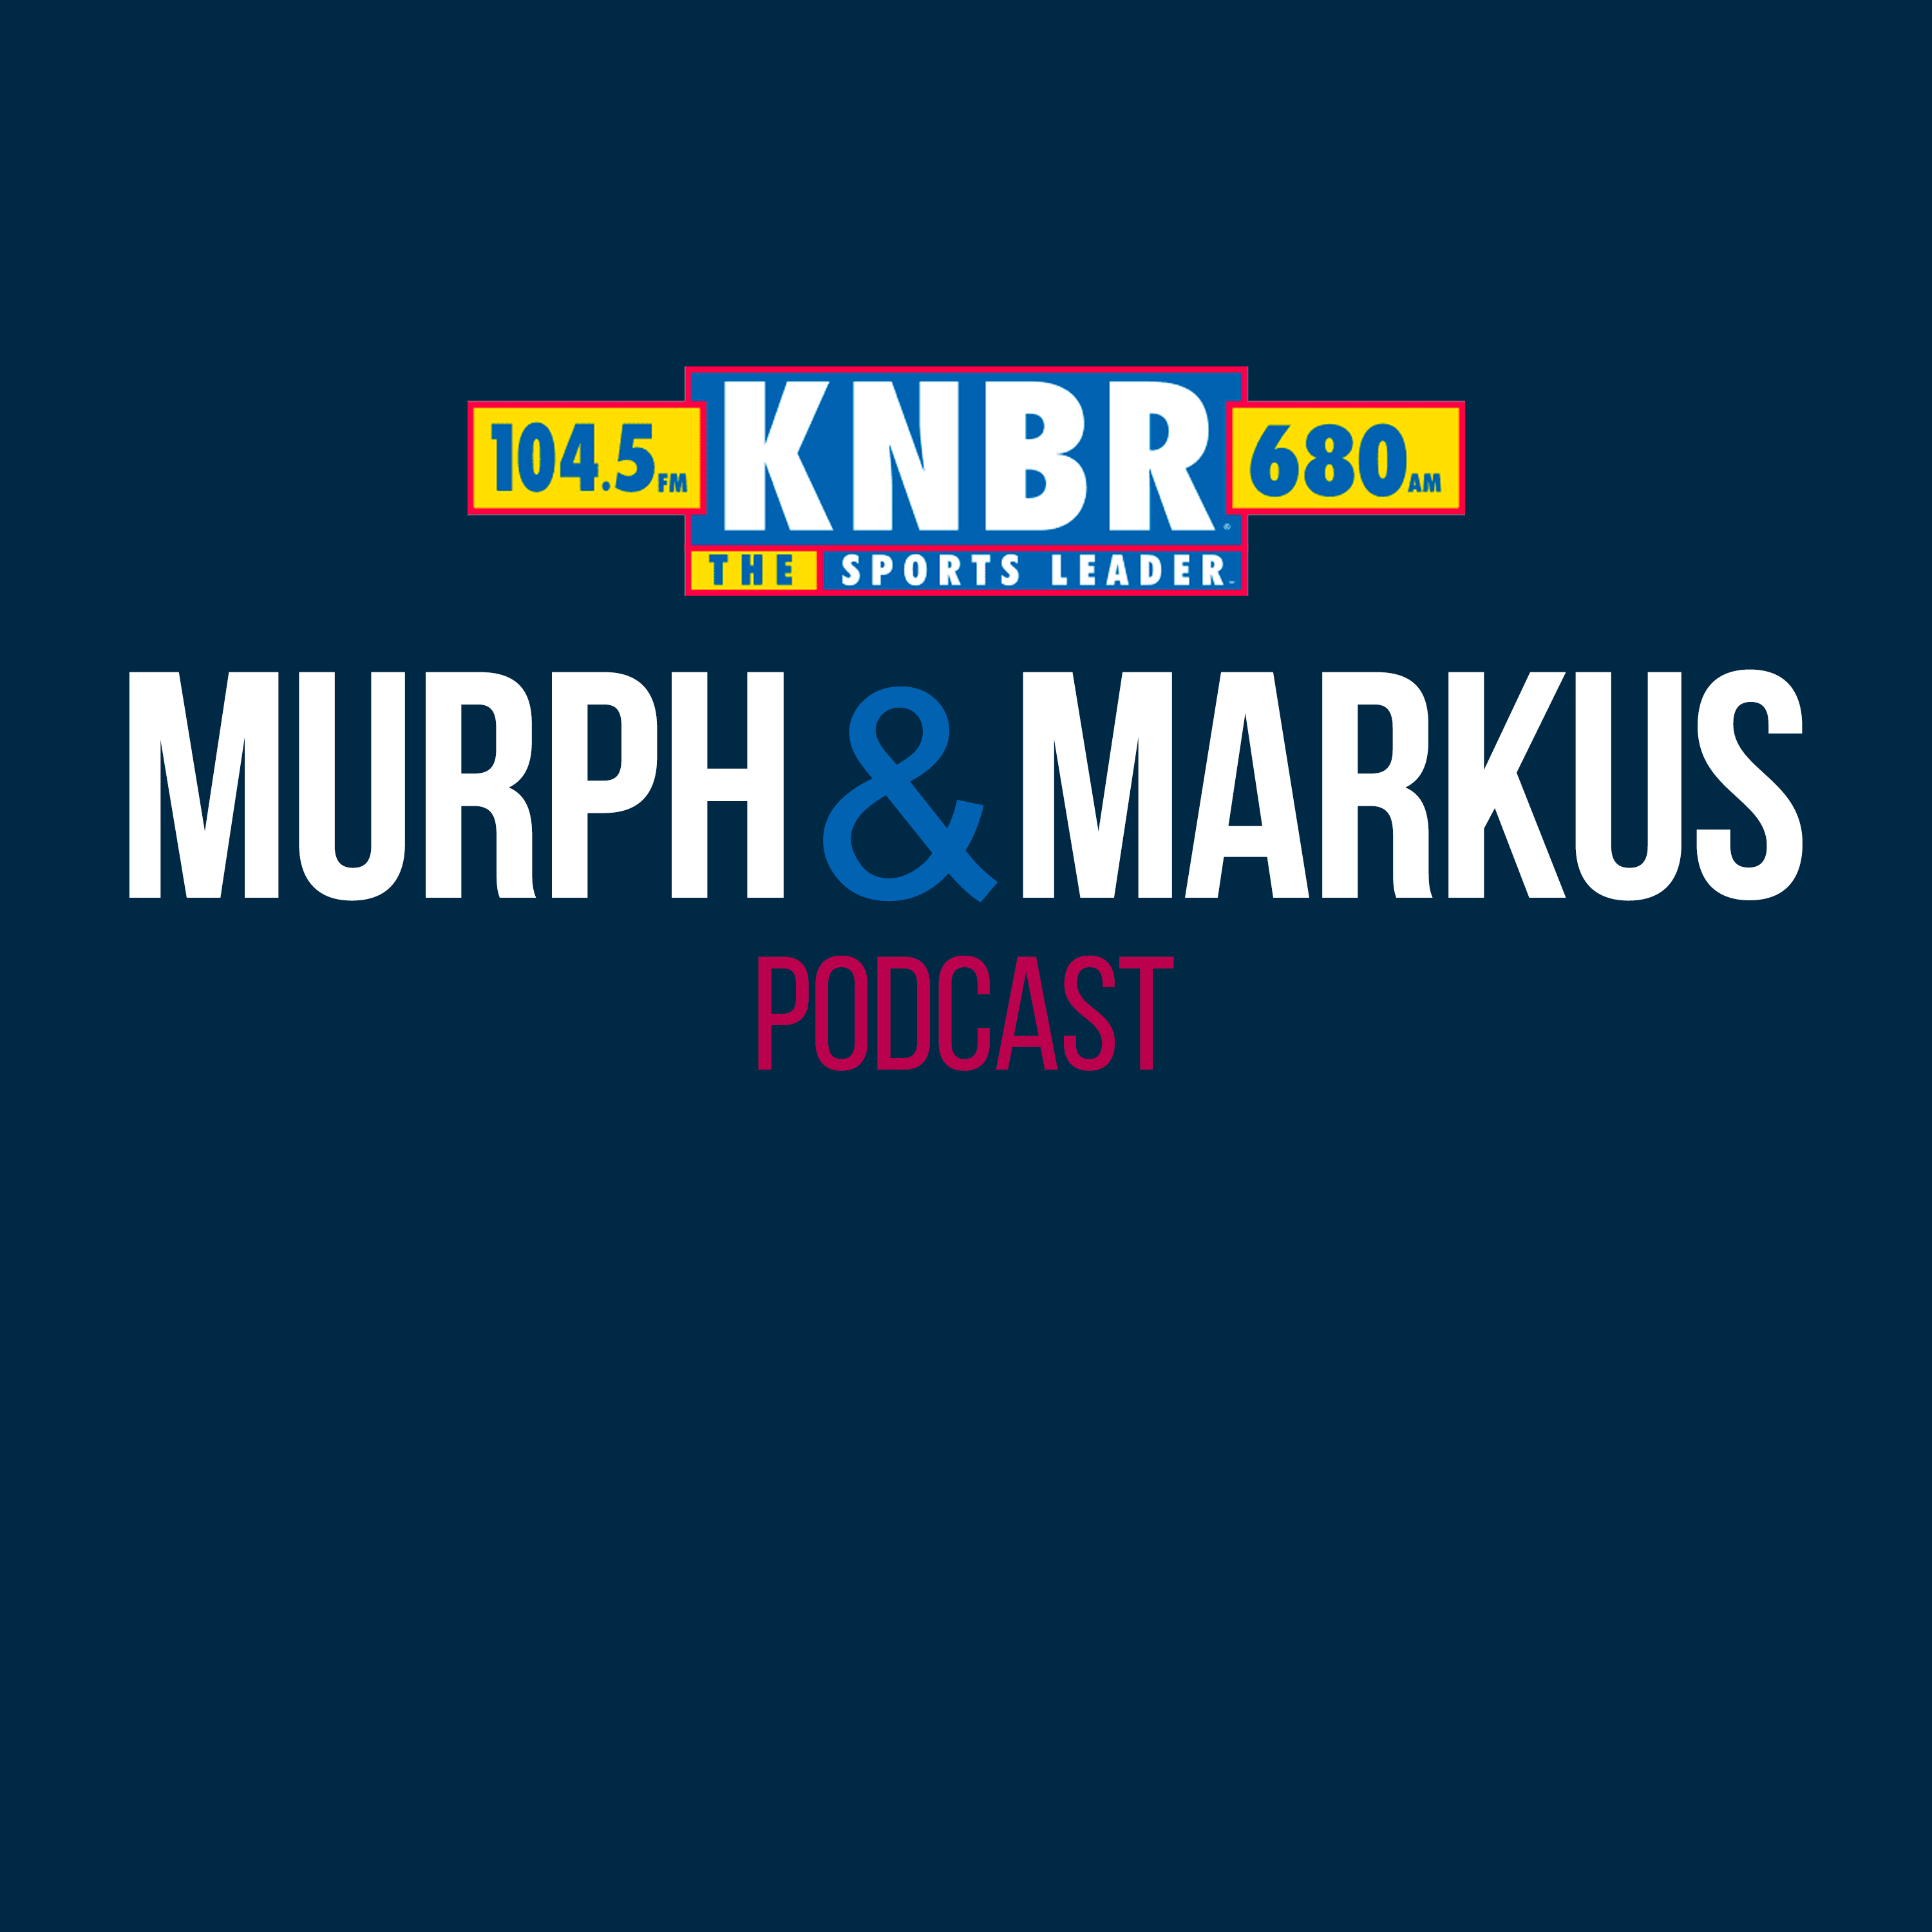 7-3 Hour 1: Murph & Markus continue to discuss the fallout from Klay Thompson leaving the Warriors, share their thoughts on the surging Giants, and react to Draymond Green's comments about the end of an era with Klay